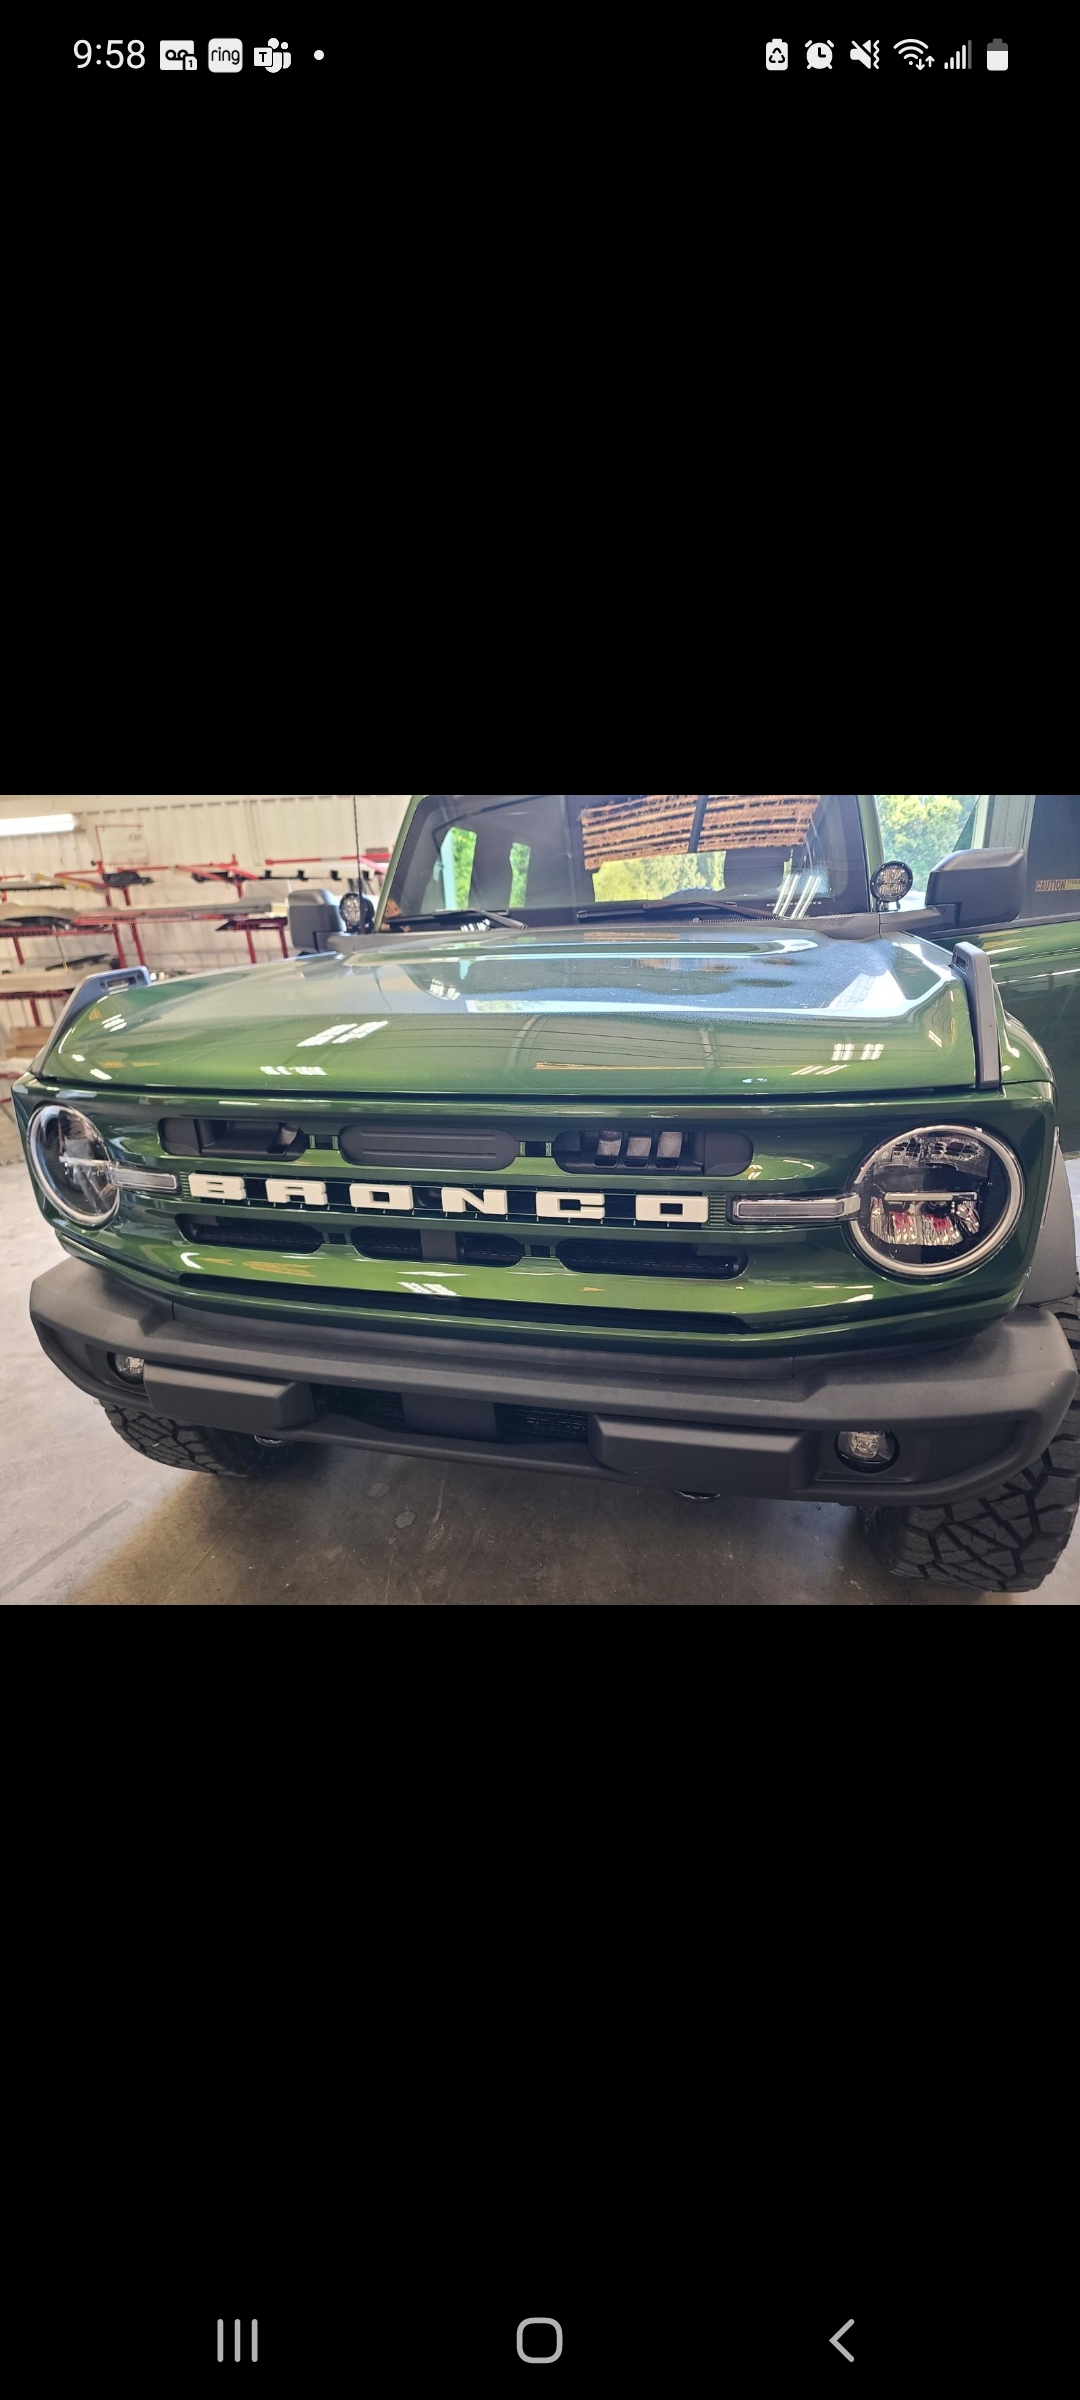 Ford Bronco Would A Body Color Grille Be A Bit Much? 6SgTM1m